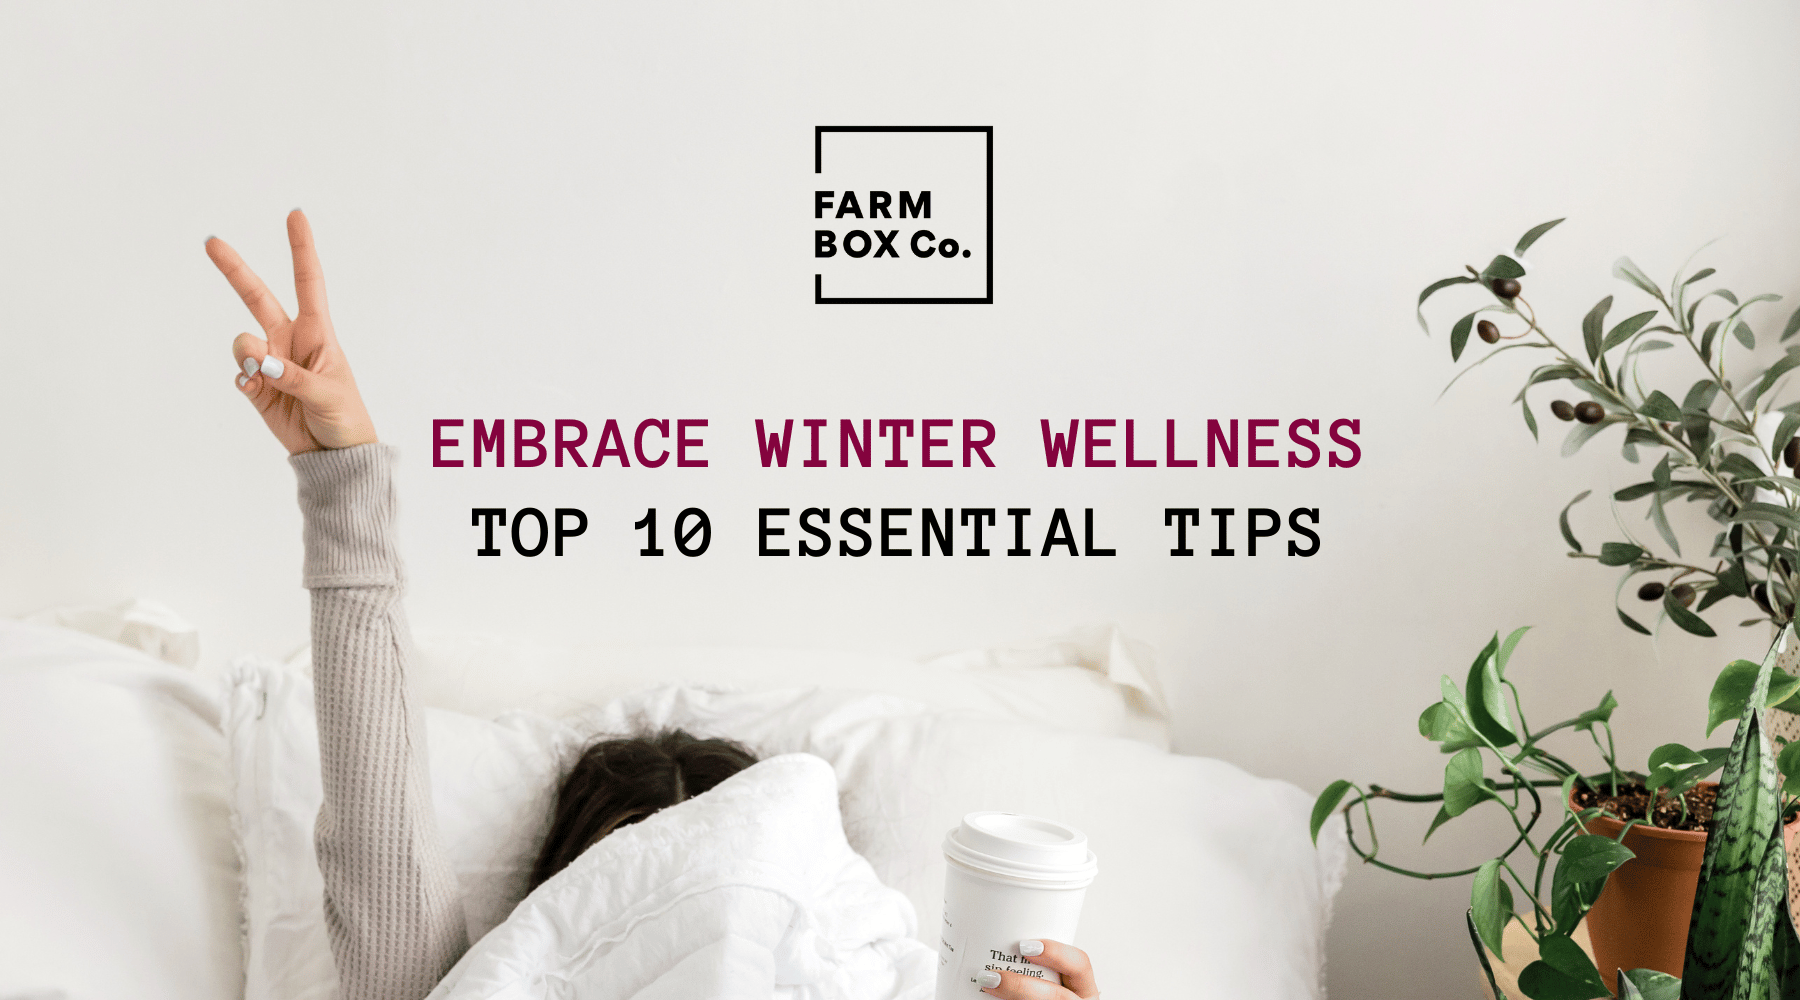 Embrace Winter Wellness: Top 10 Essential Tips from Farmbox Co.